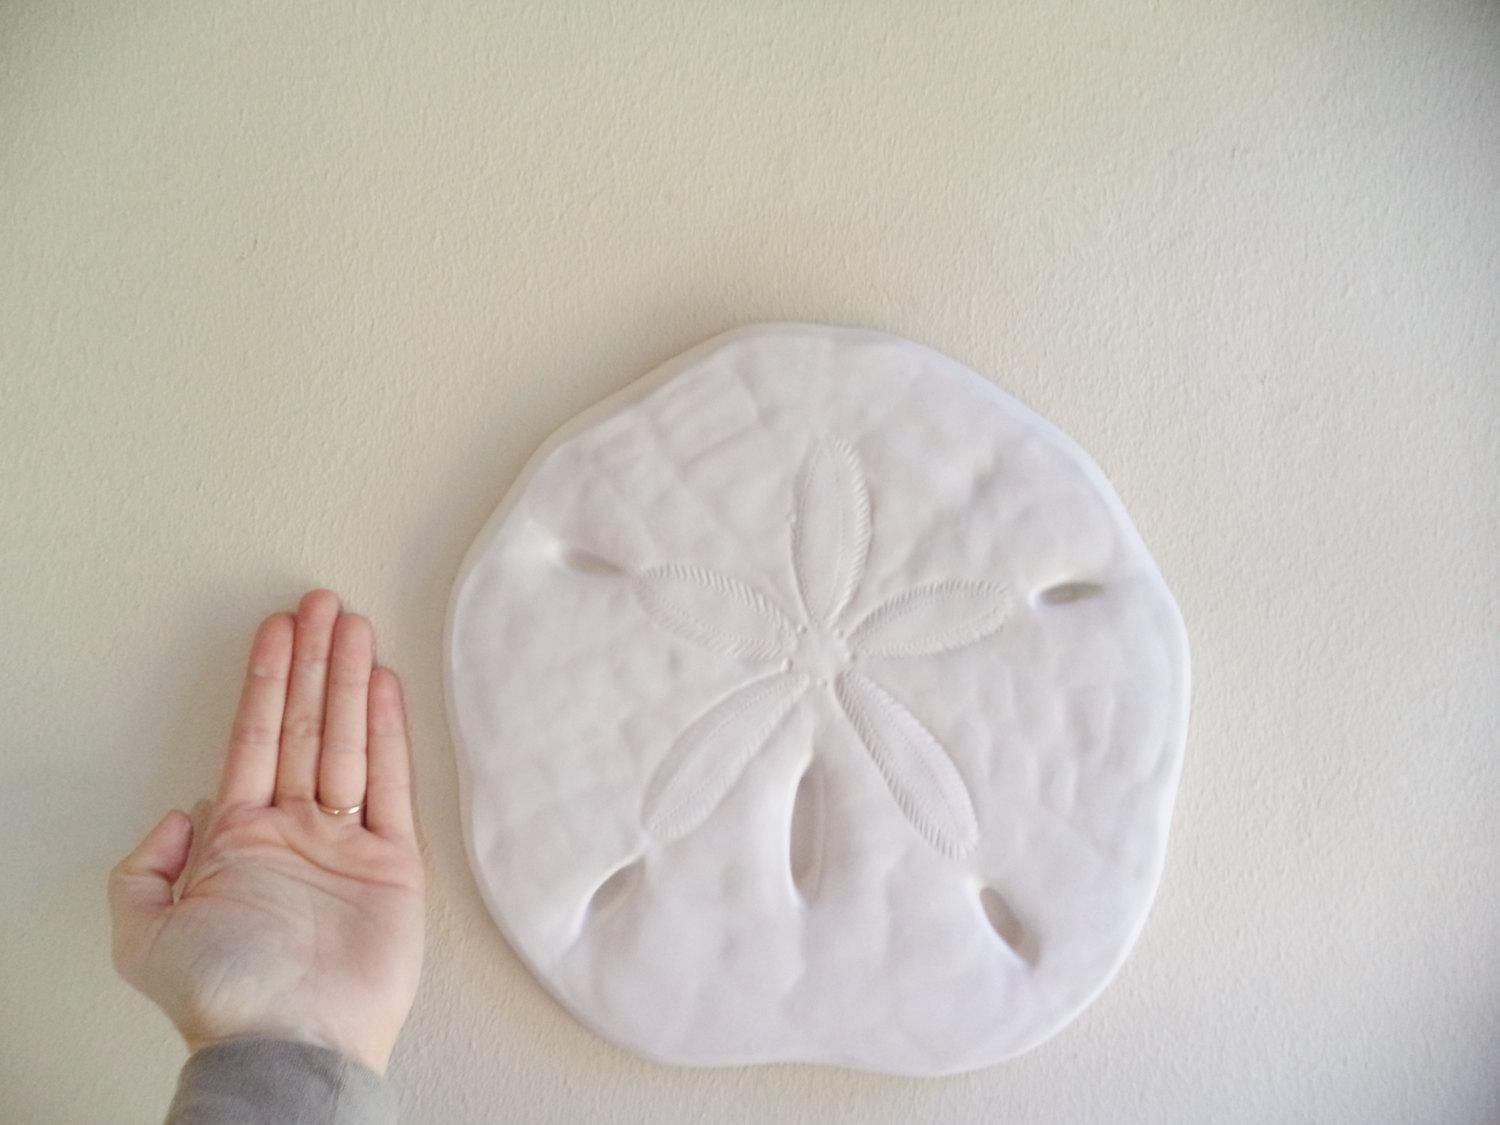 Sand Dollar Wall Hanging Sculpture Sea Shell Beach Decor Pertaining To Sand Dollar Wall Art (View 11 of 20)